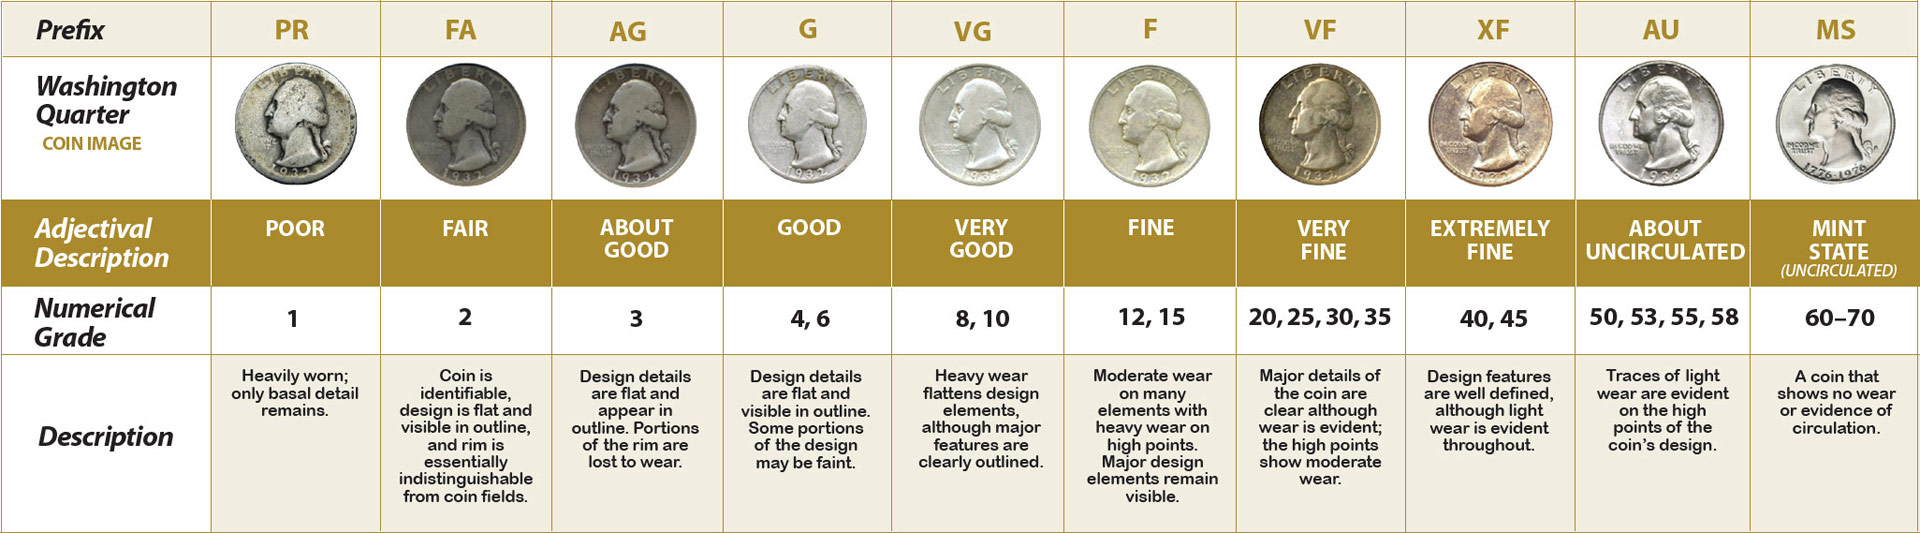 Grading-Coins-by-Photographs-2nd-Edition